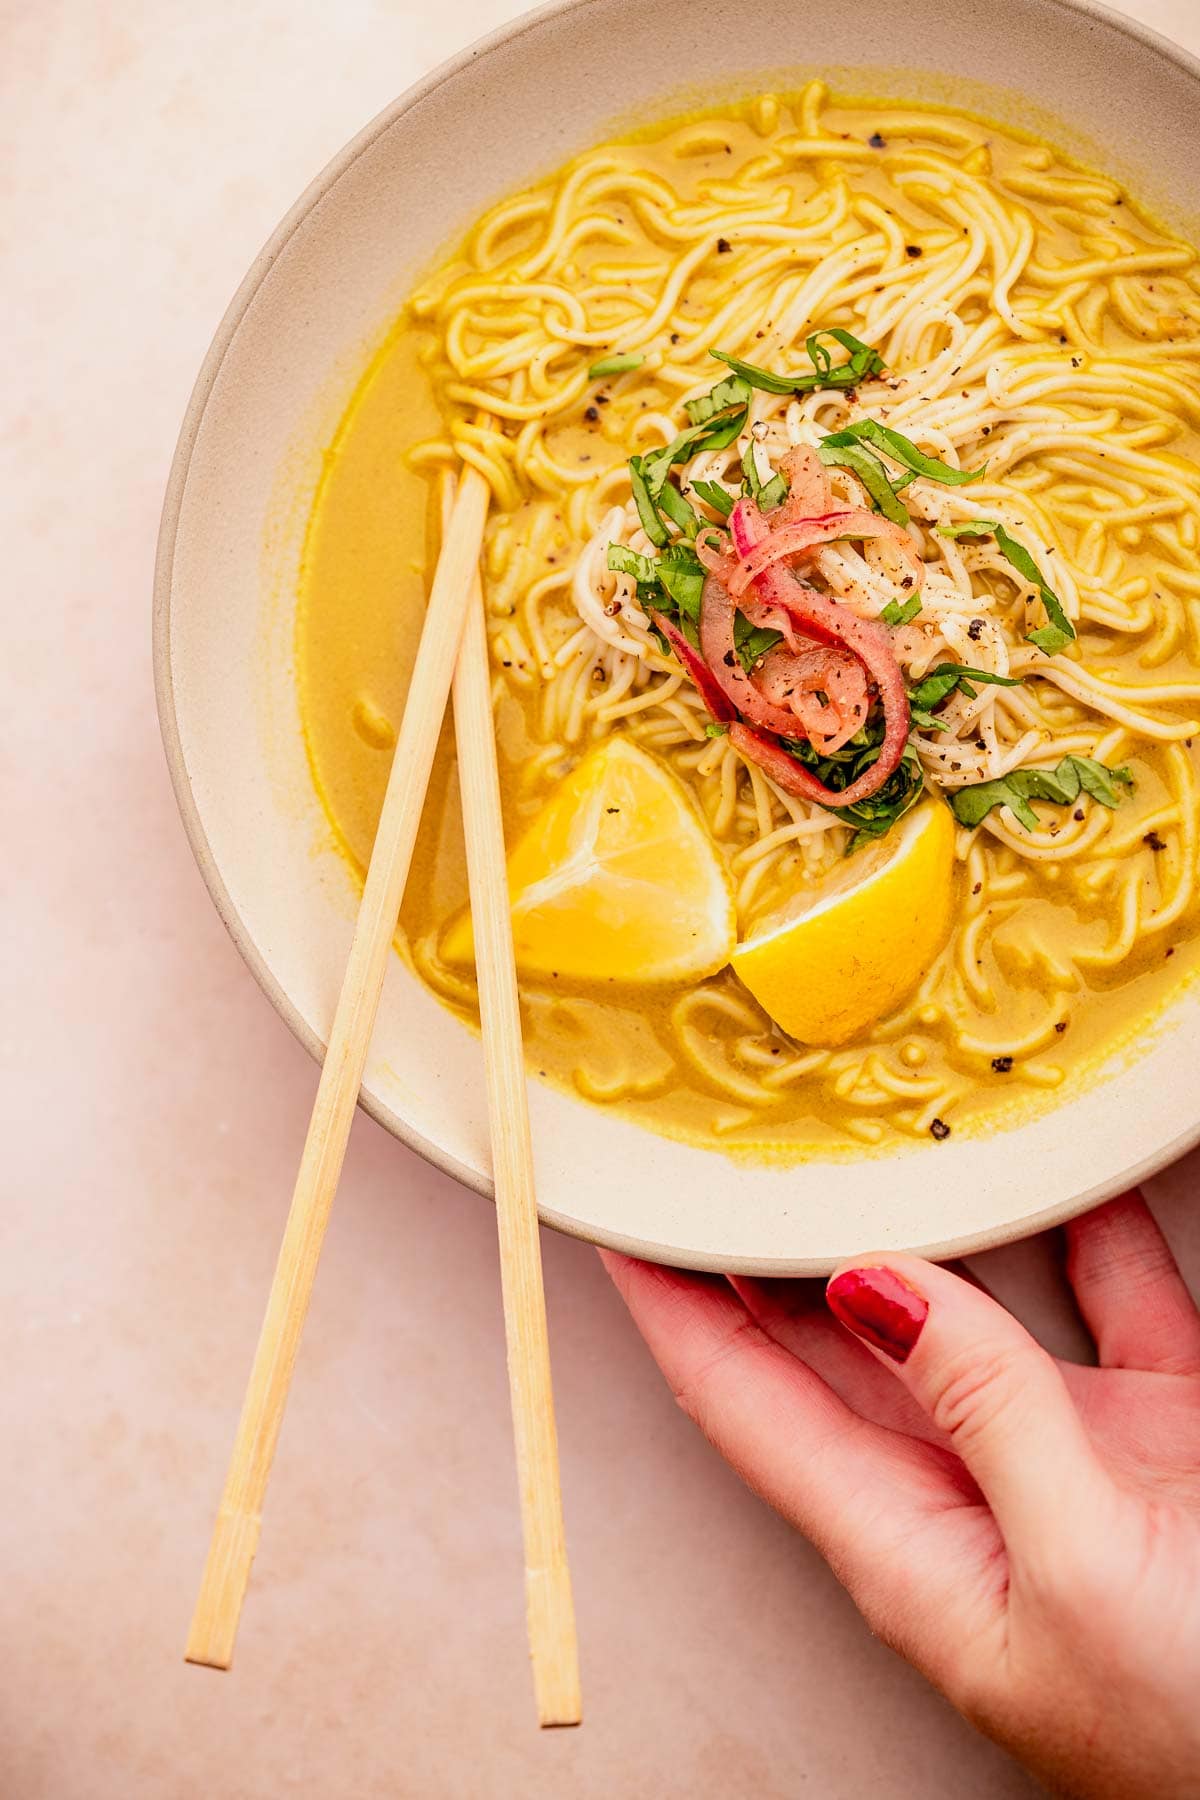 A person holding a bowl of golden noodles with chopsticks.